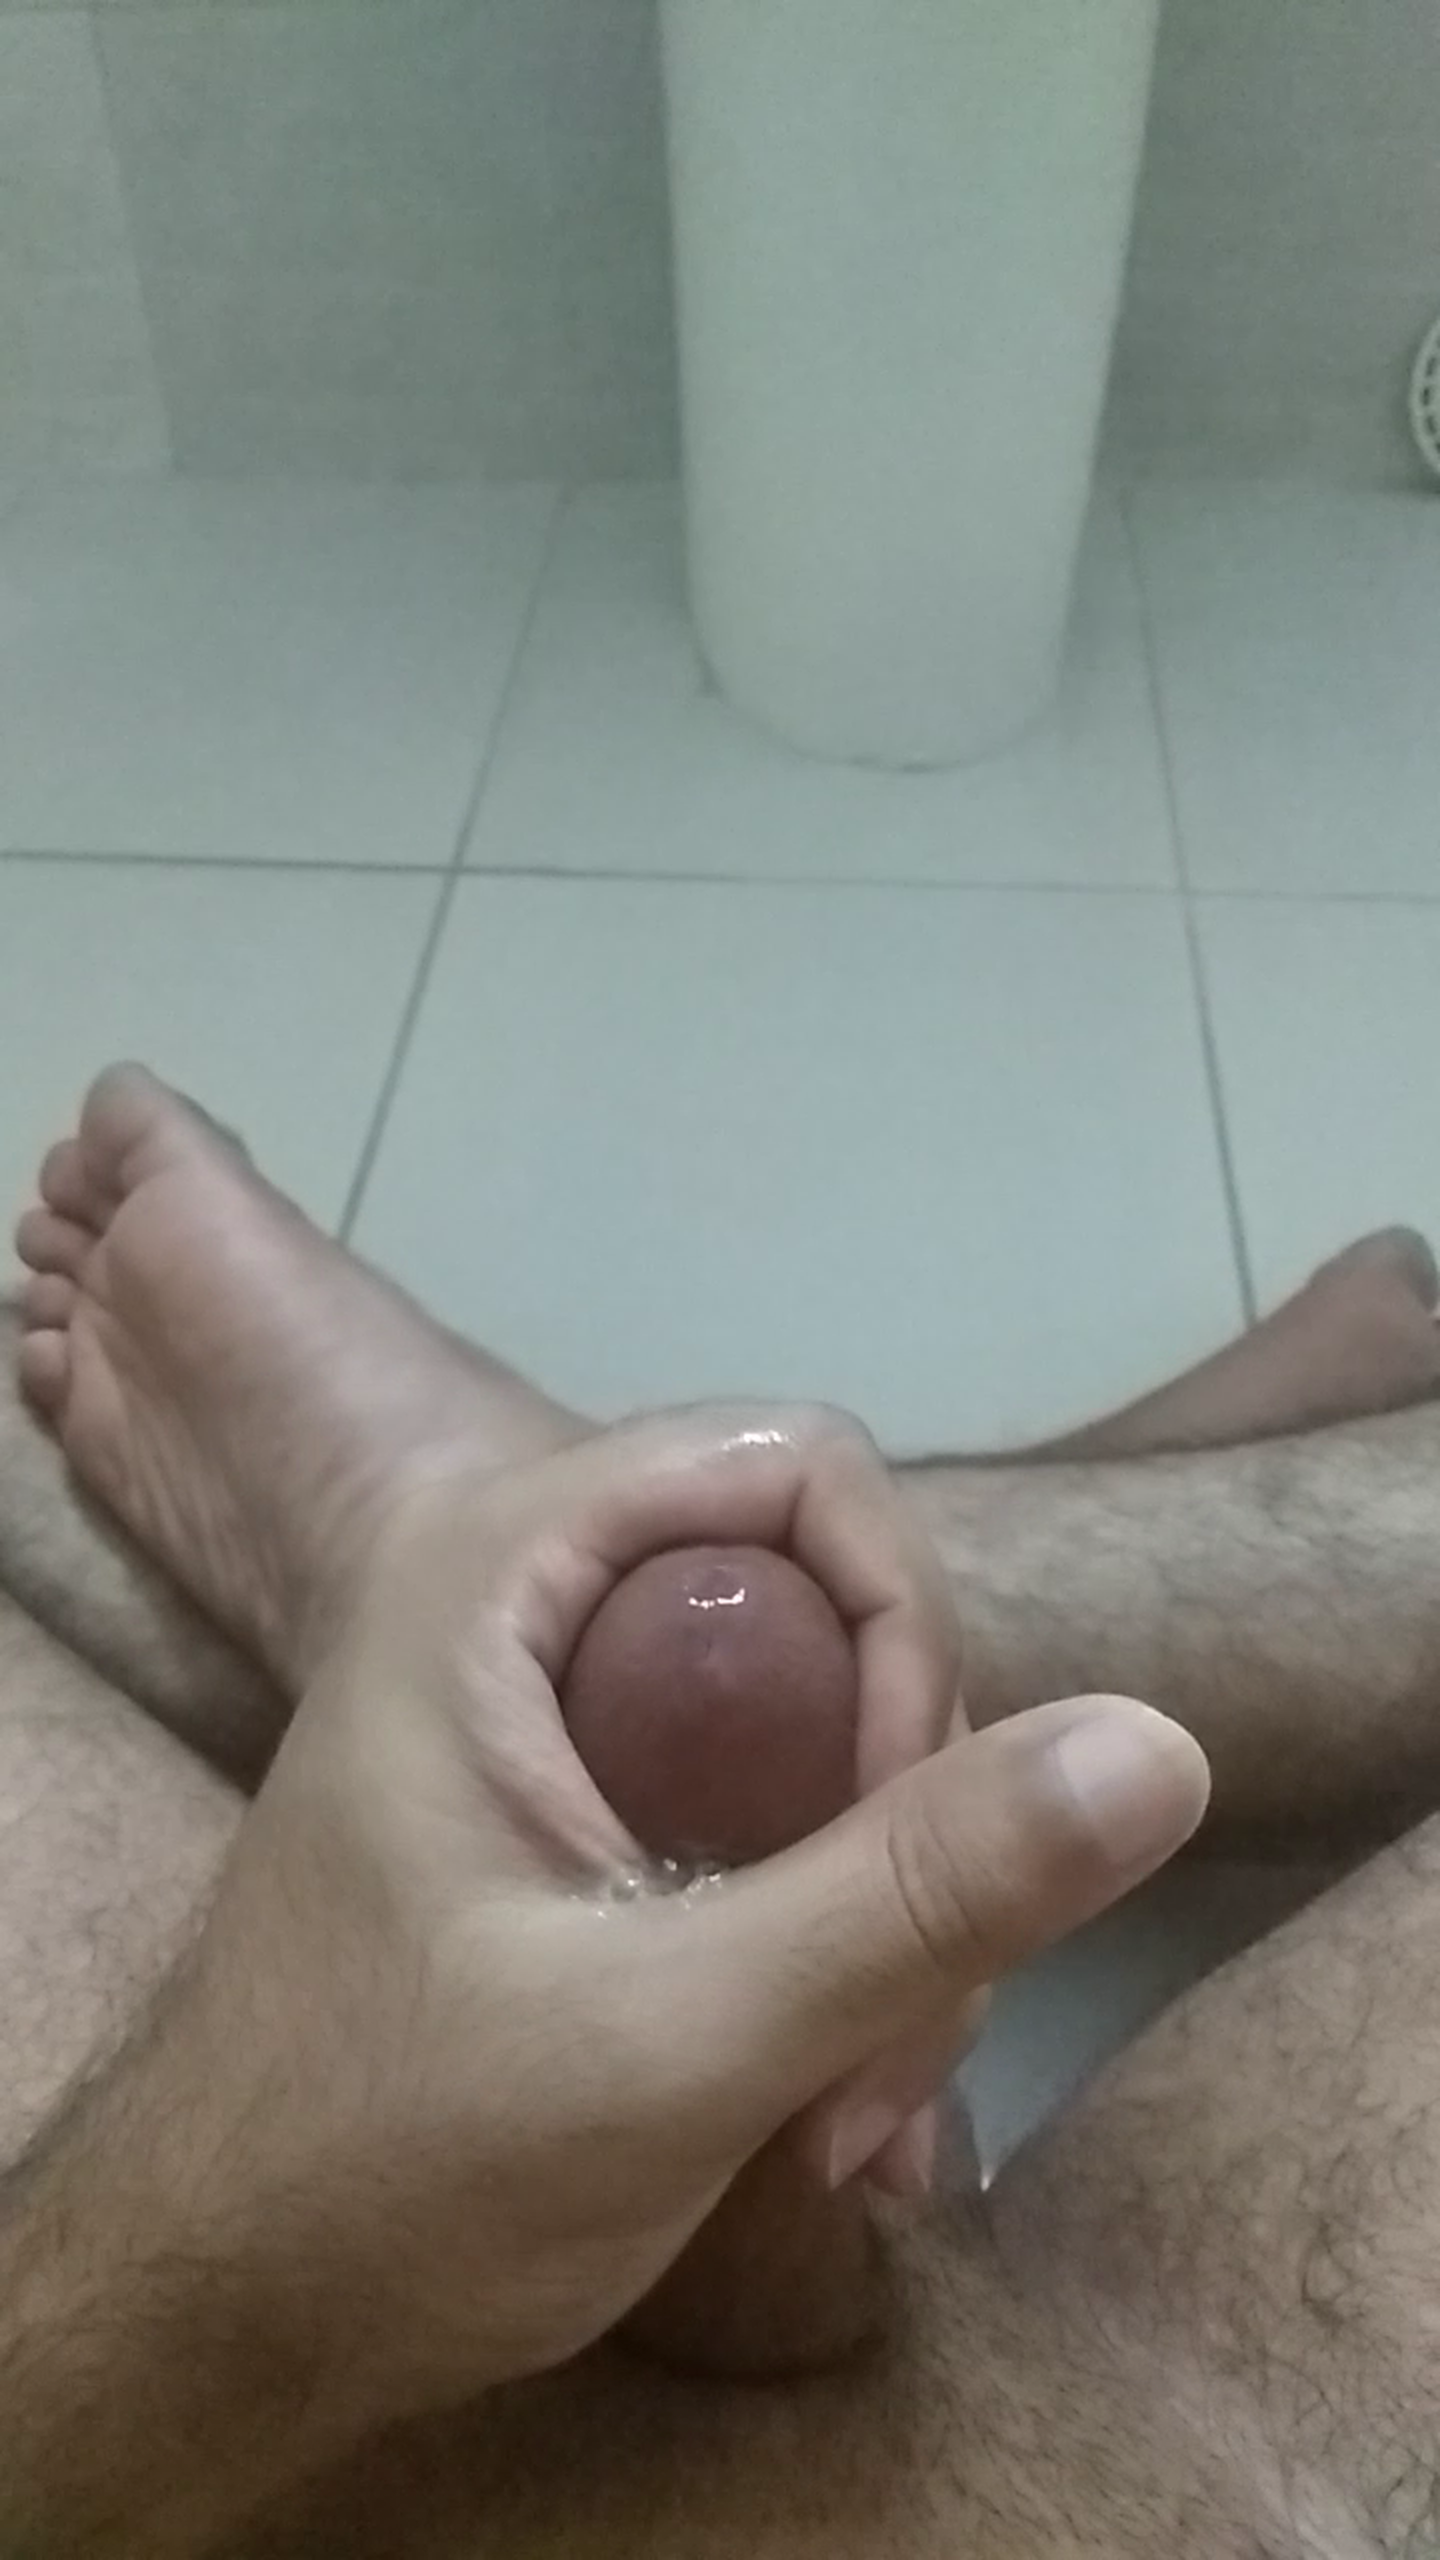 Watch the Video by Kalif with the username @kalif, posted on July 21, 2020. The post is about the topic Masturbation. and the text says 'Chuth!'